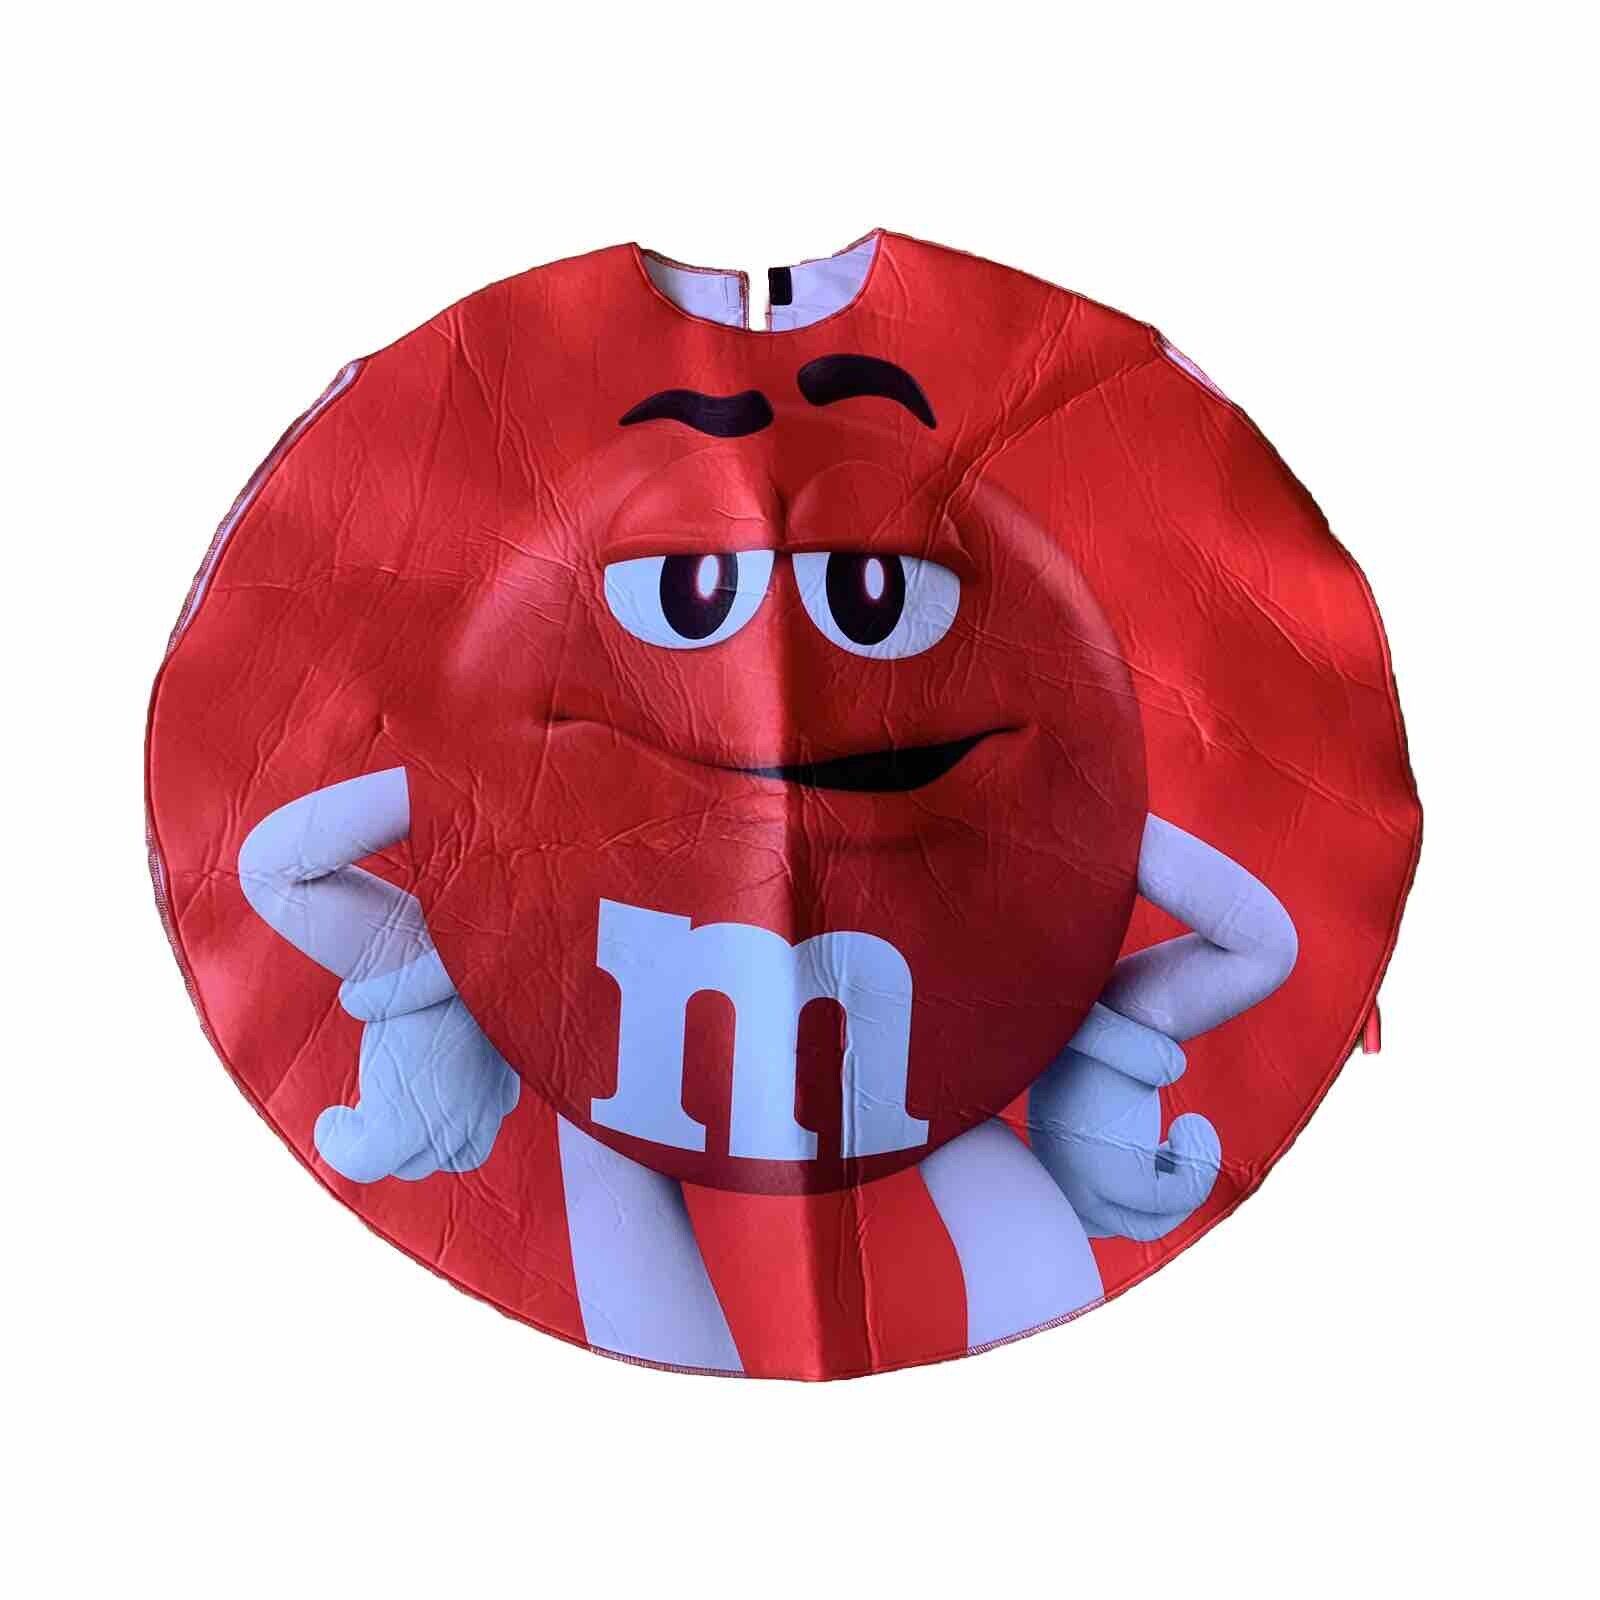 M&M’s Candy Costume Deluxe Adult Size Halloween Red MM Mars Unisex